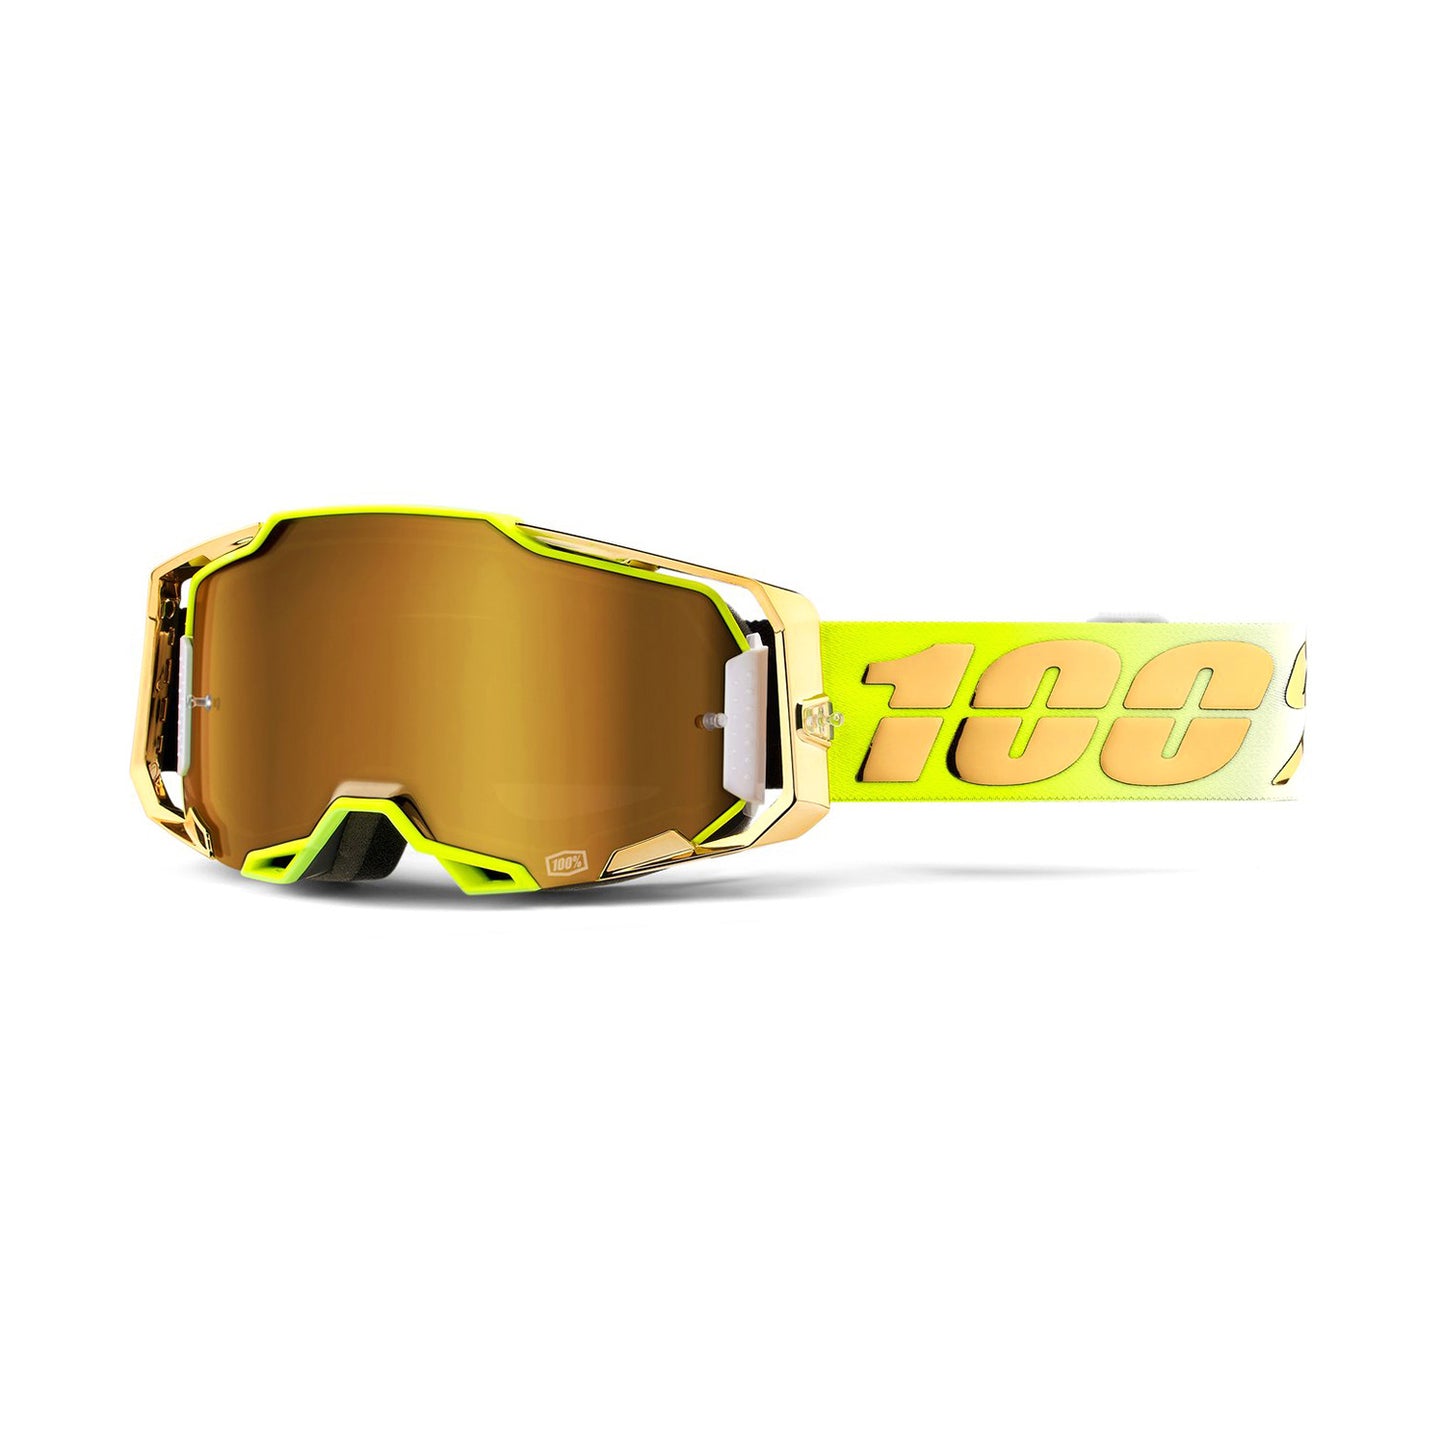 100 Percent Armega Goggles - One Size Fits Most - Feelgood - True Gold Lens